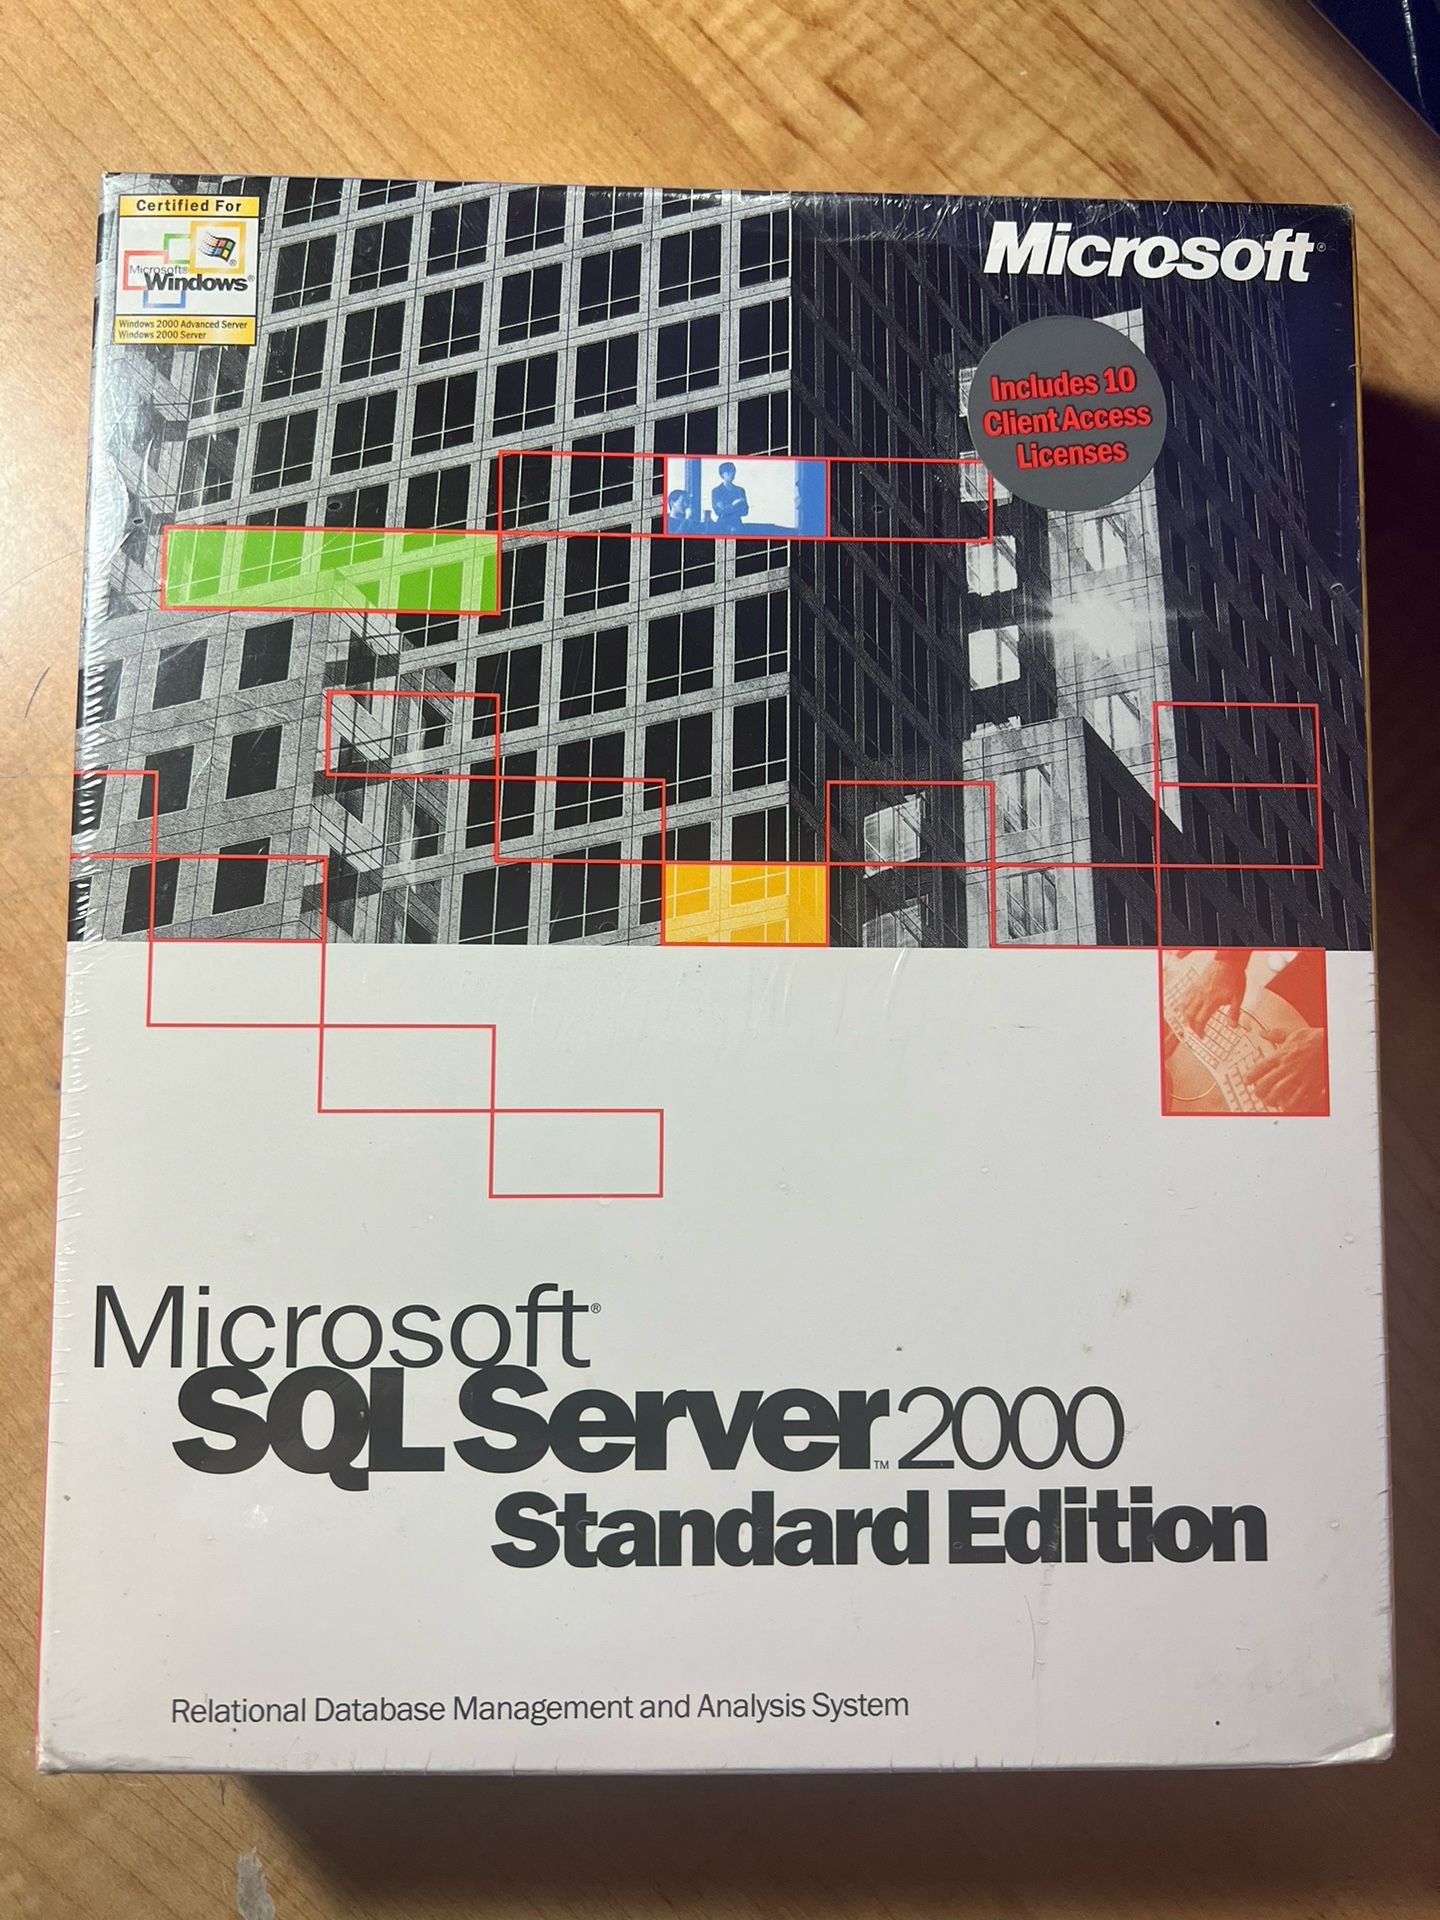 Microsoft SQL Server 2000 Standard Edition (10 Clients) ** NEW SEALED